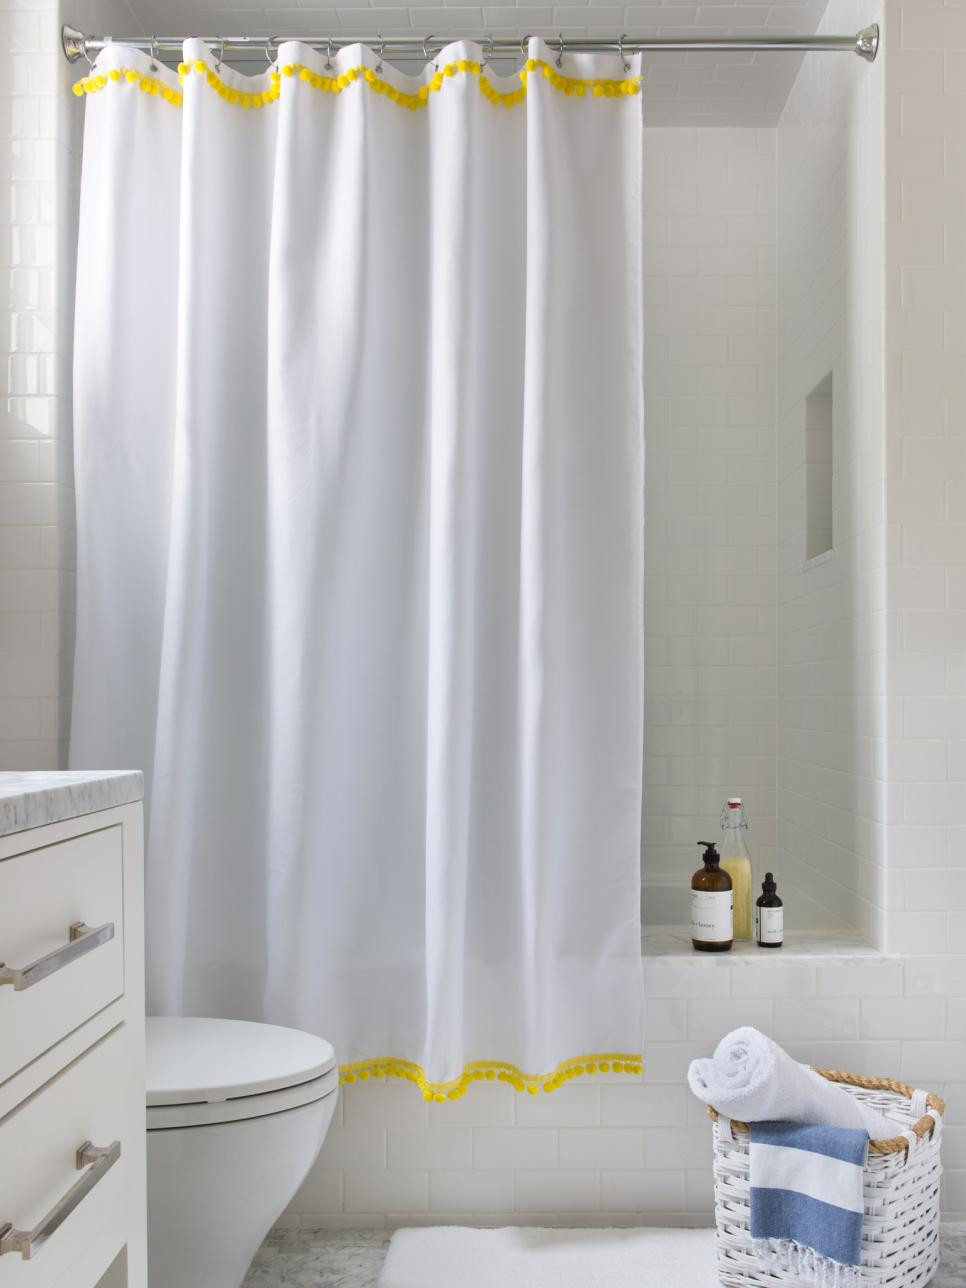 Country Bathroom Shower Curtains
 Country Style Bathroom Shower Curtains – Shower Curtains Ideas